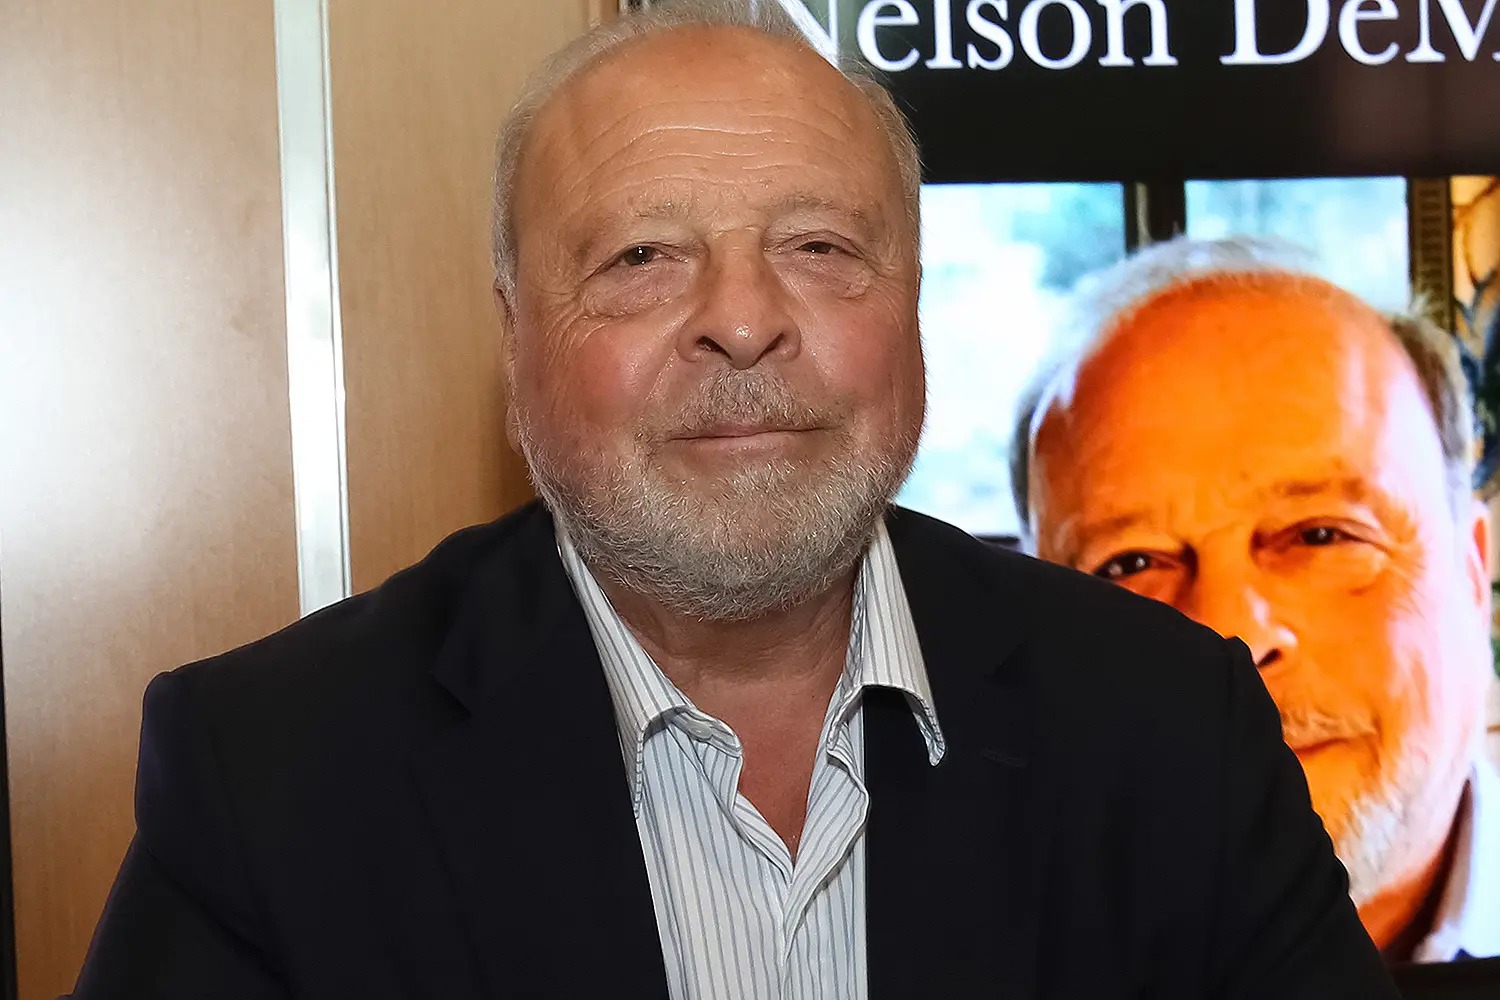 19-astounding-facts-about-nelson-demille